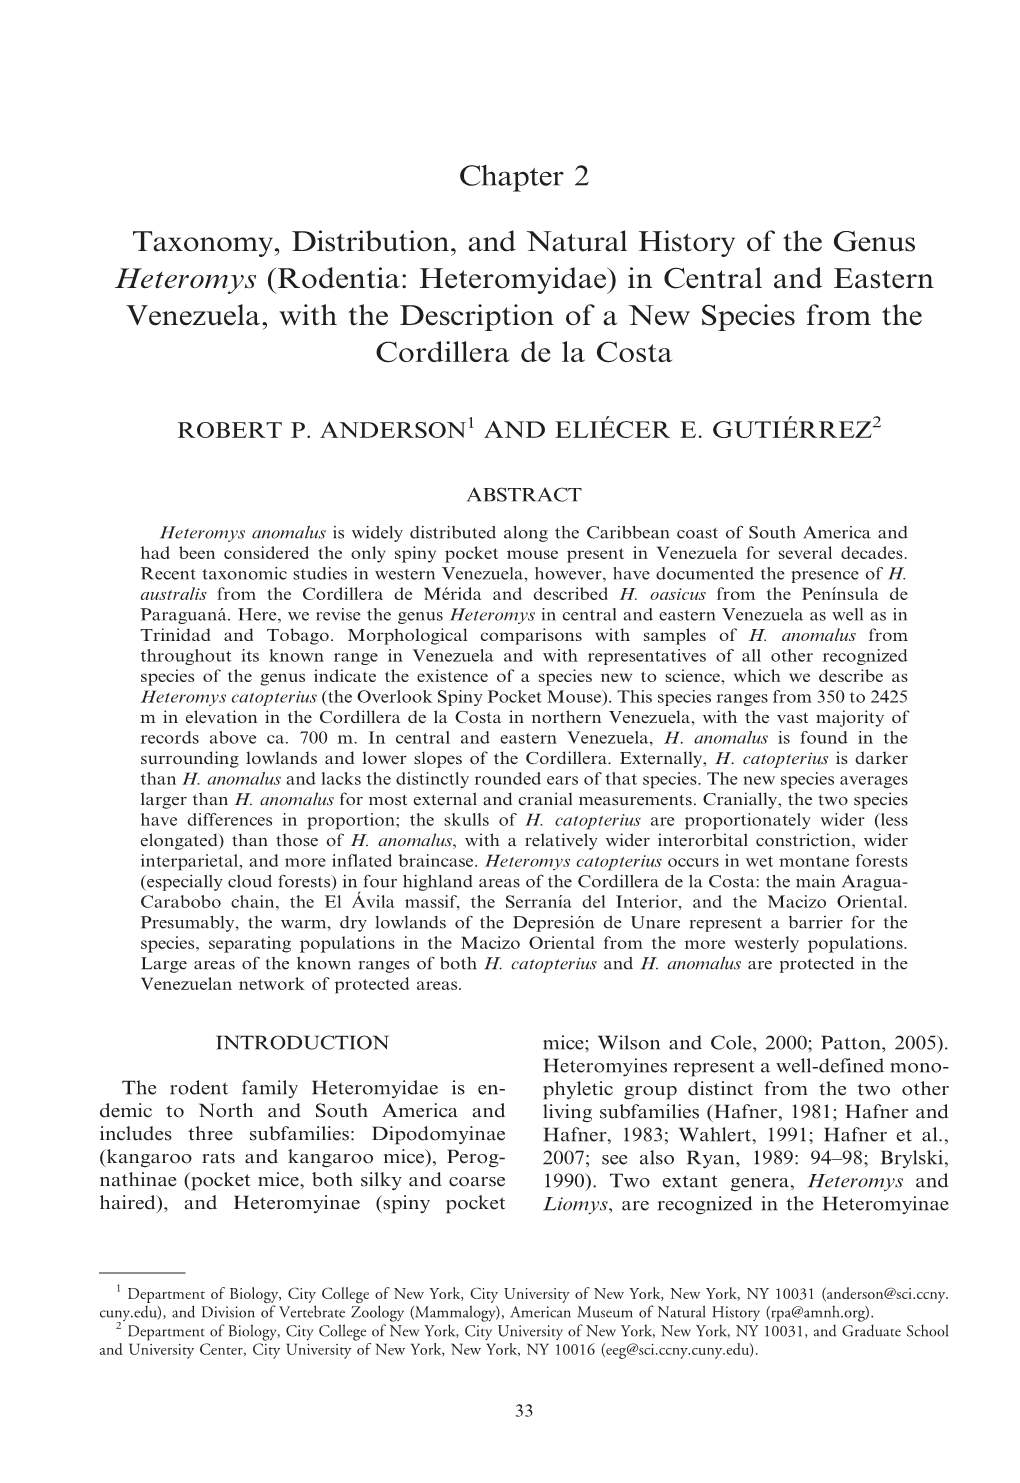 Chapter 2 Taxonomy, Distribution, and Natural History of the Genus